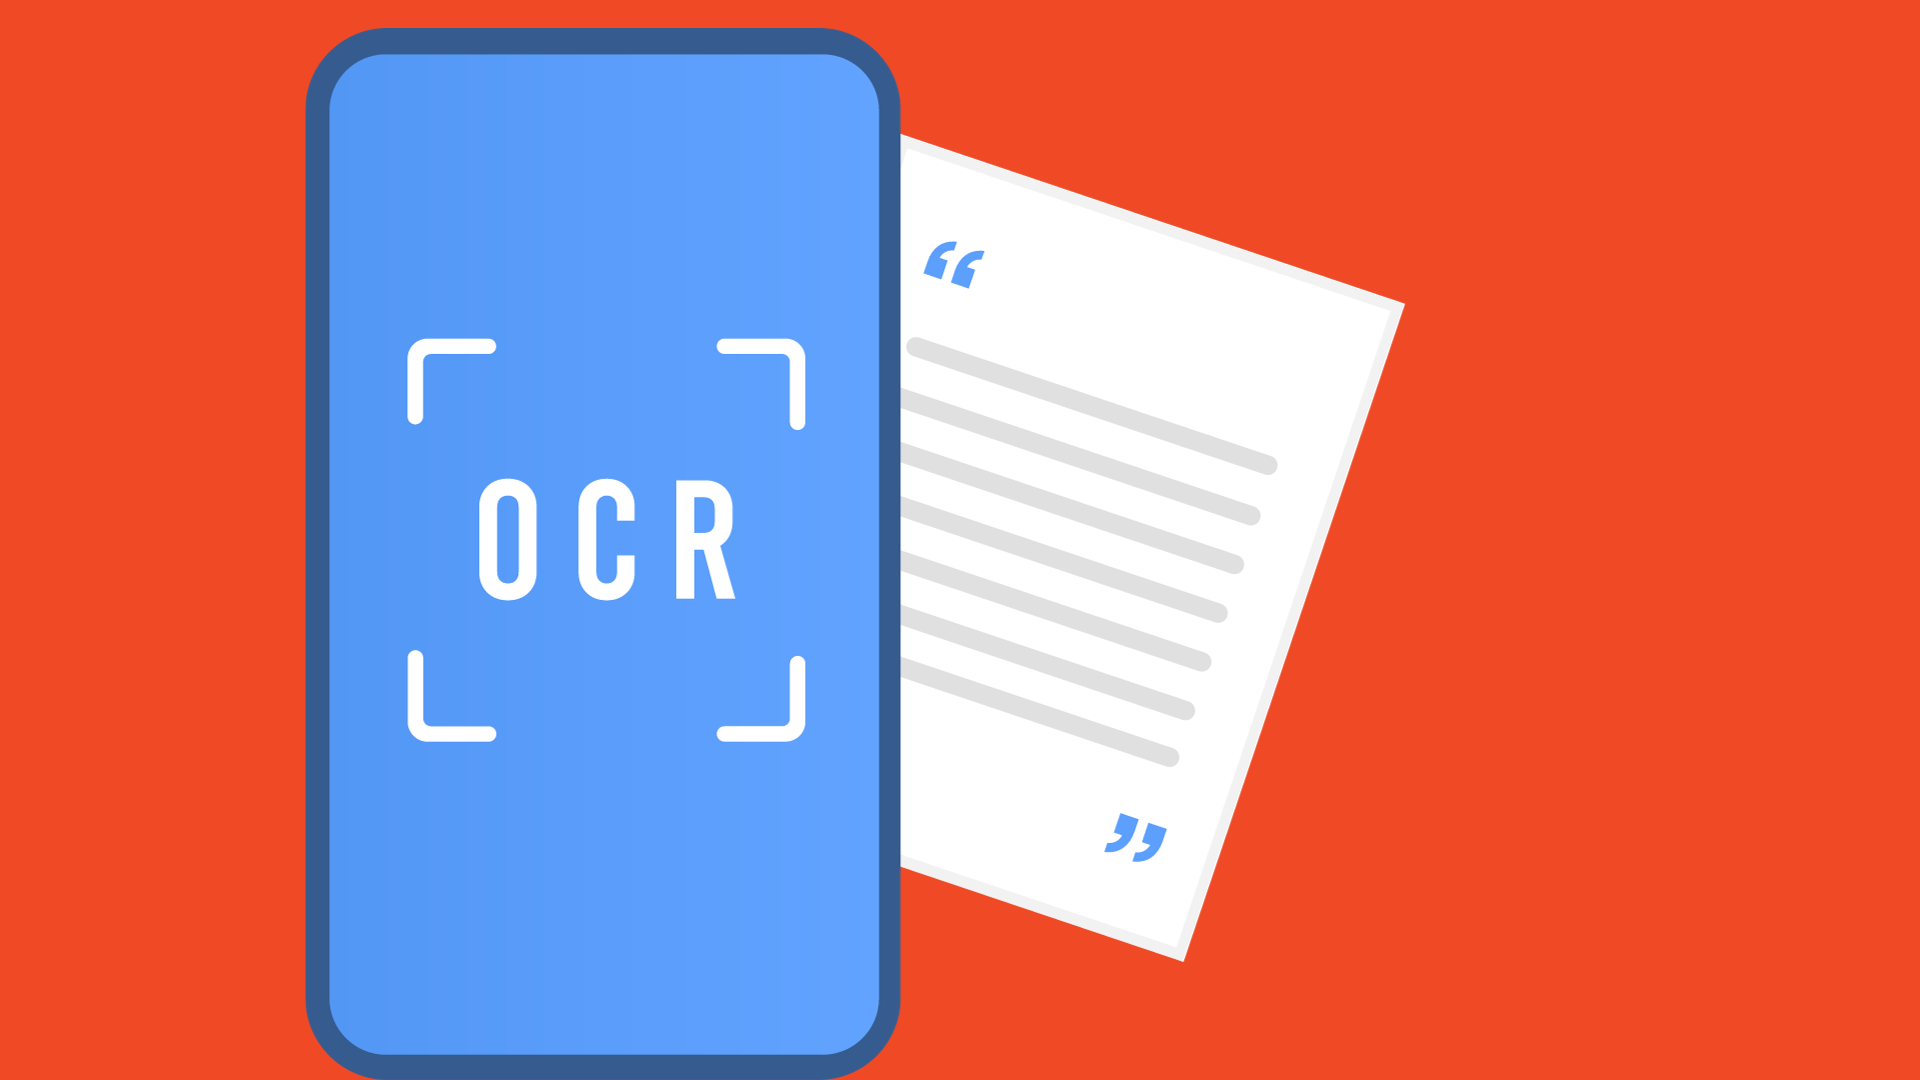 Document scanning through OCR SDK documentation in mobile apps for data extraction